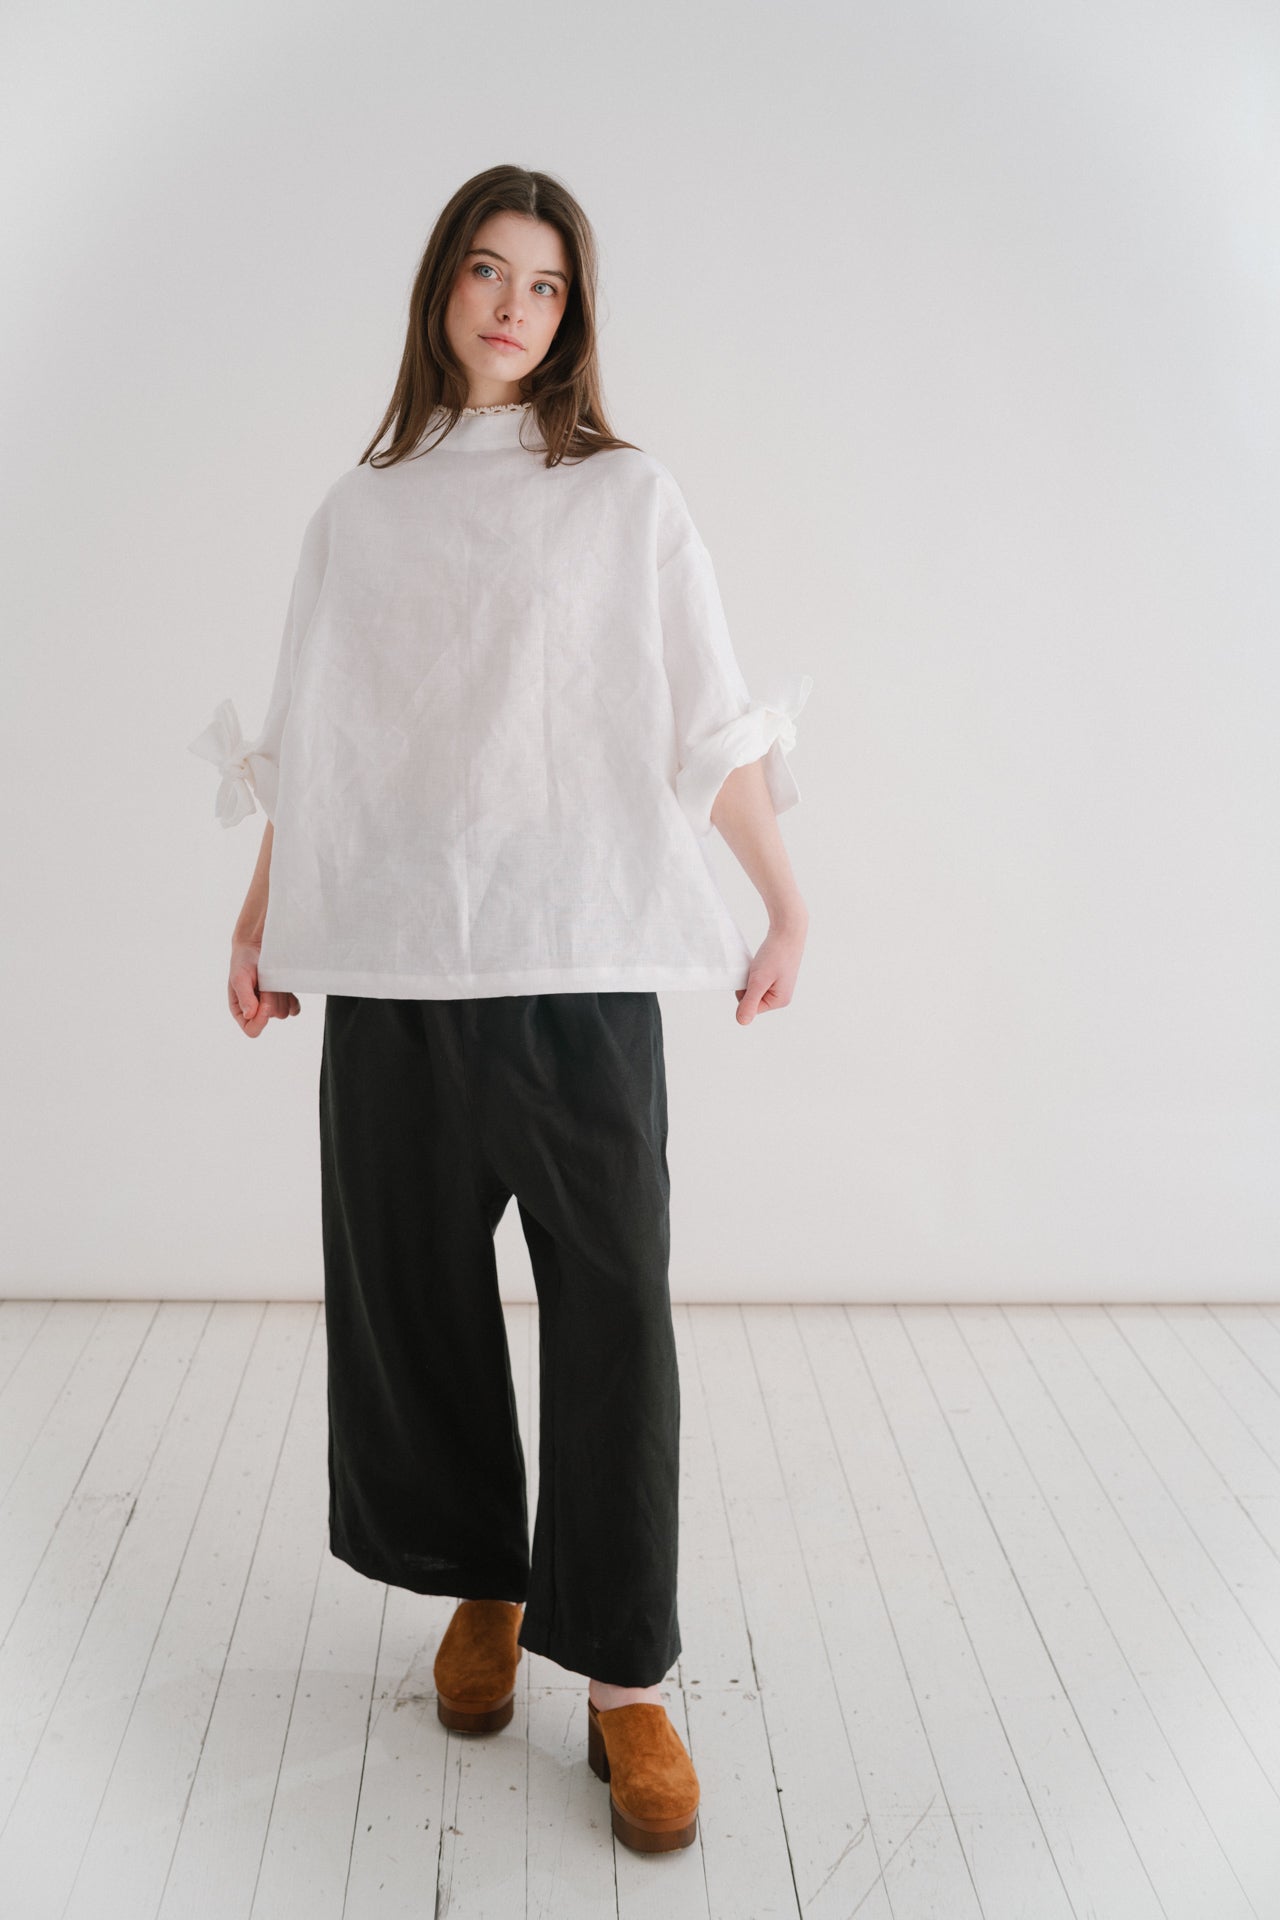 VIVIENNE | IRISH CROCHET | This is a pretty special one- the shirt you will keep forever and pass on to your kin. Created with the purest white linen, the asymetric button placket and bows on the sleeves give it a fun and modern edge, while the addition o